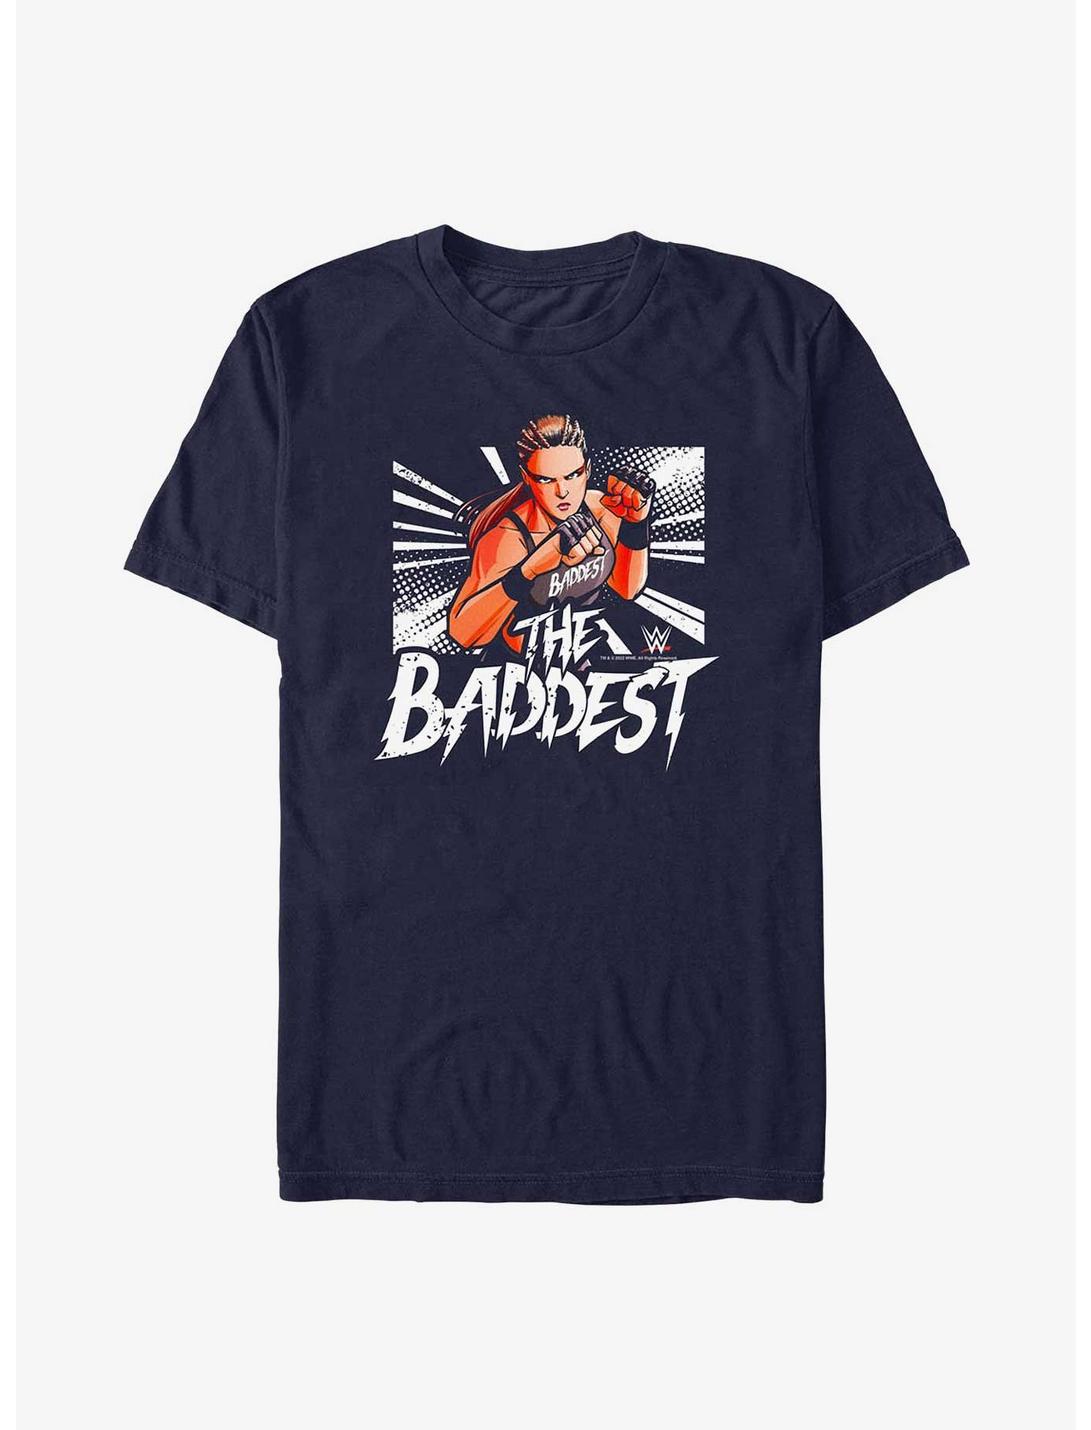 WWE Ronda Rousey The Baddest Comic Book Style T-Shirt, NAVY, hi-res